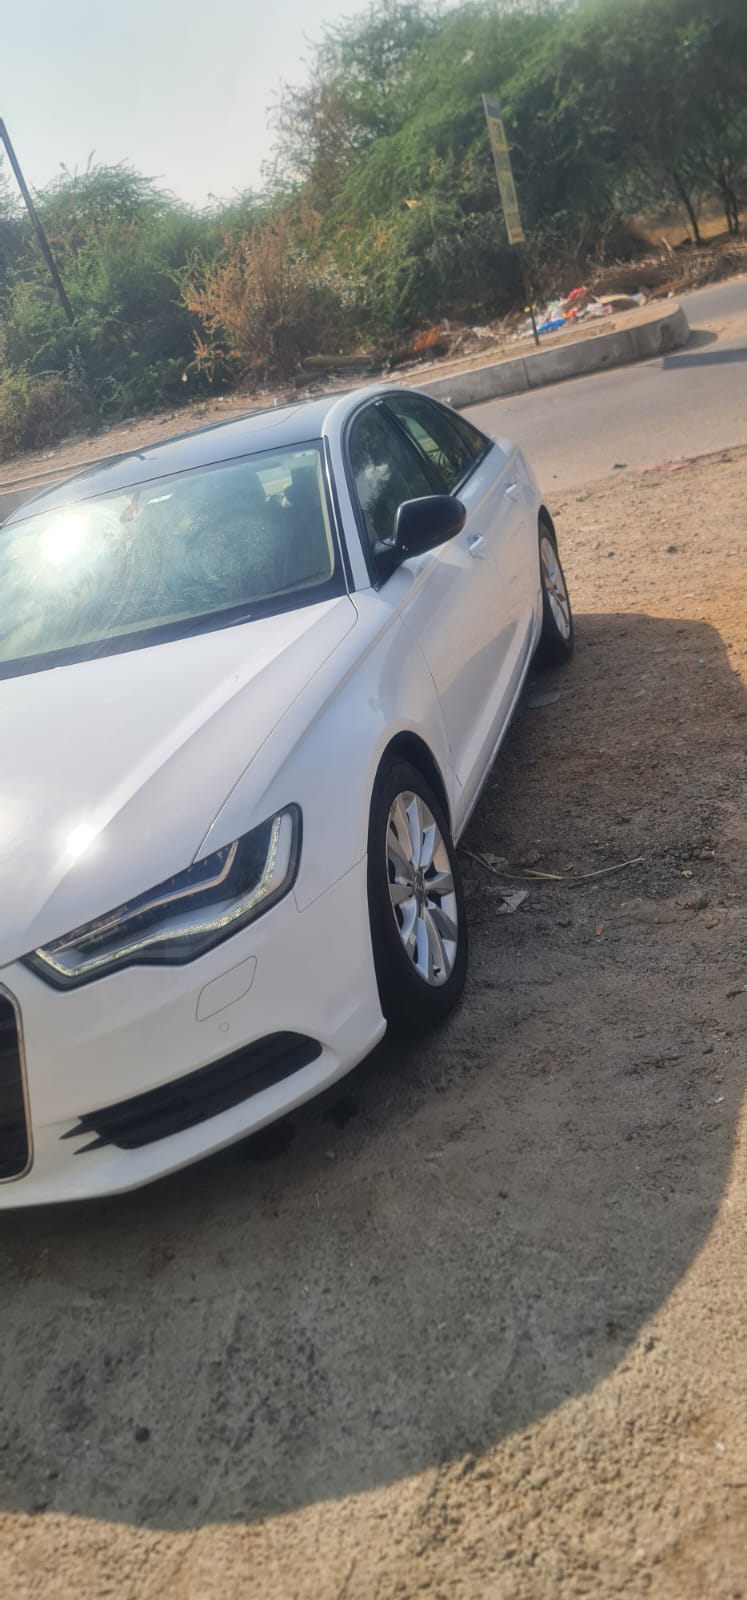 Details View - Four wheeler  photos - reseller,reseller marketplace,advetising your products,reseller bazzar,resellerbazzar.in,india's classified site,Audi a6 first owener 93000 km 